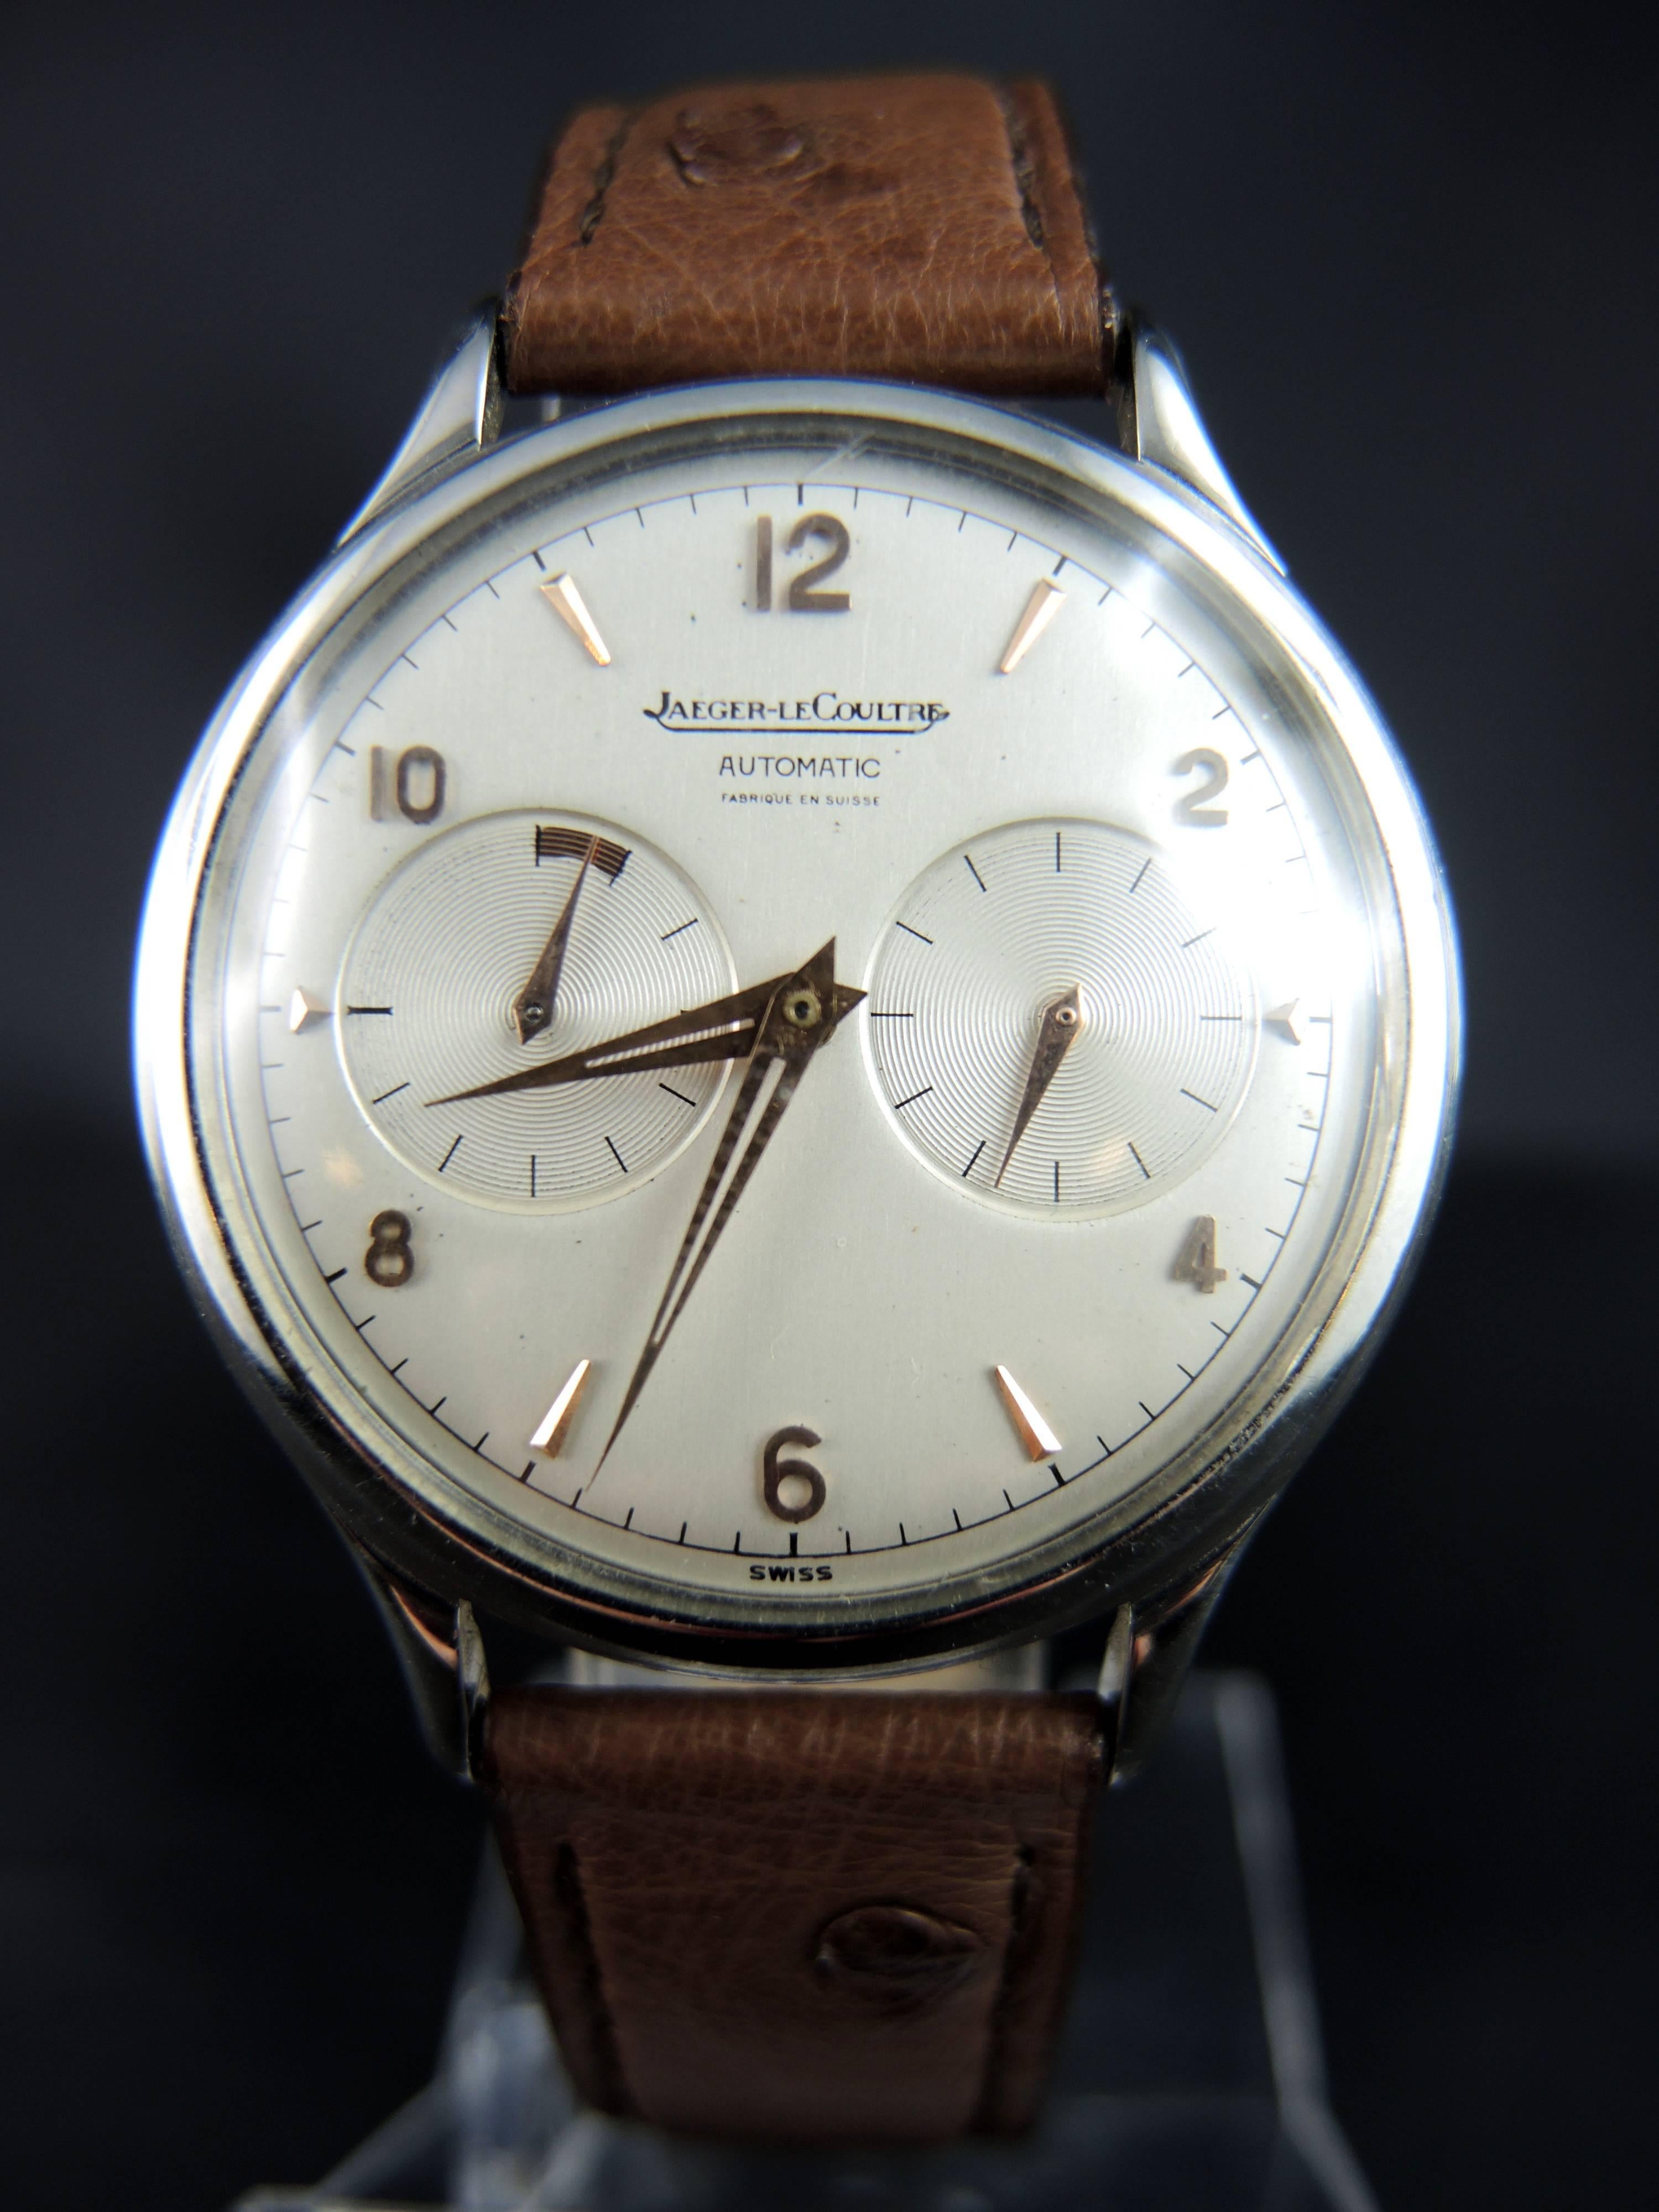 A superb and very rare Jaeger-LeCoultre Futurmatic wrist watch, made in 1957.

Steel box, with silvered dial features applied baton indexes and arabic numerals, constant seconds, and power reserve display.
Crown at the back of the